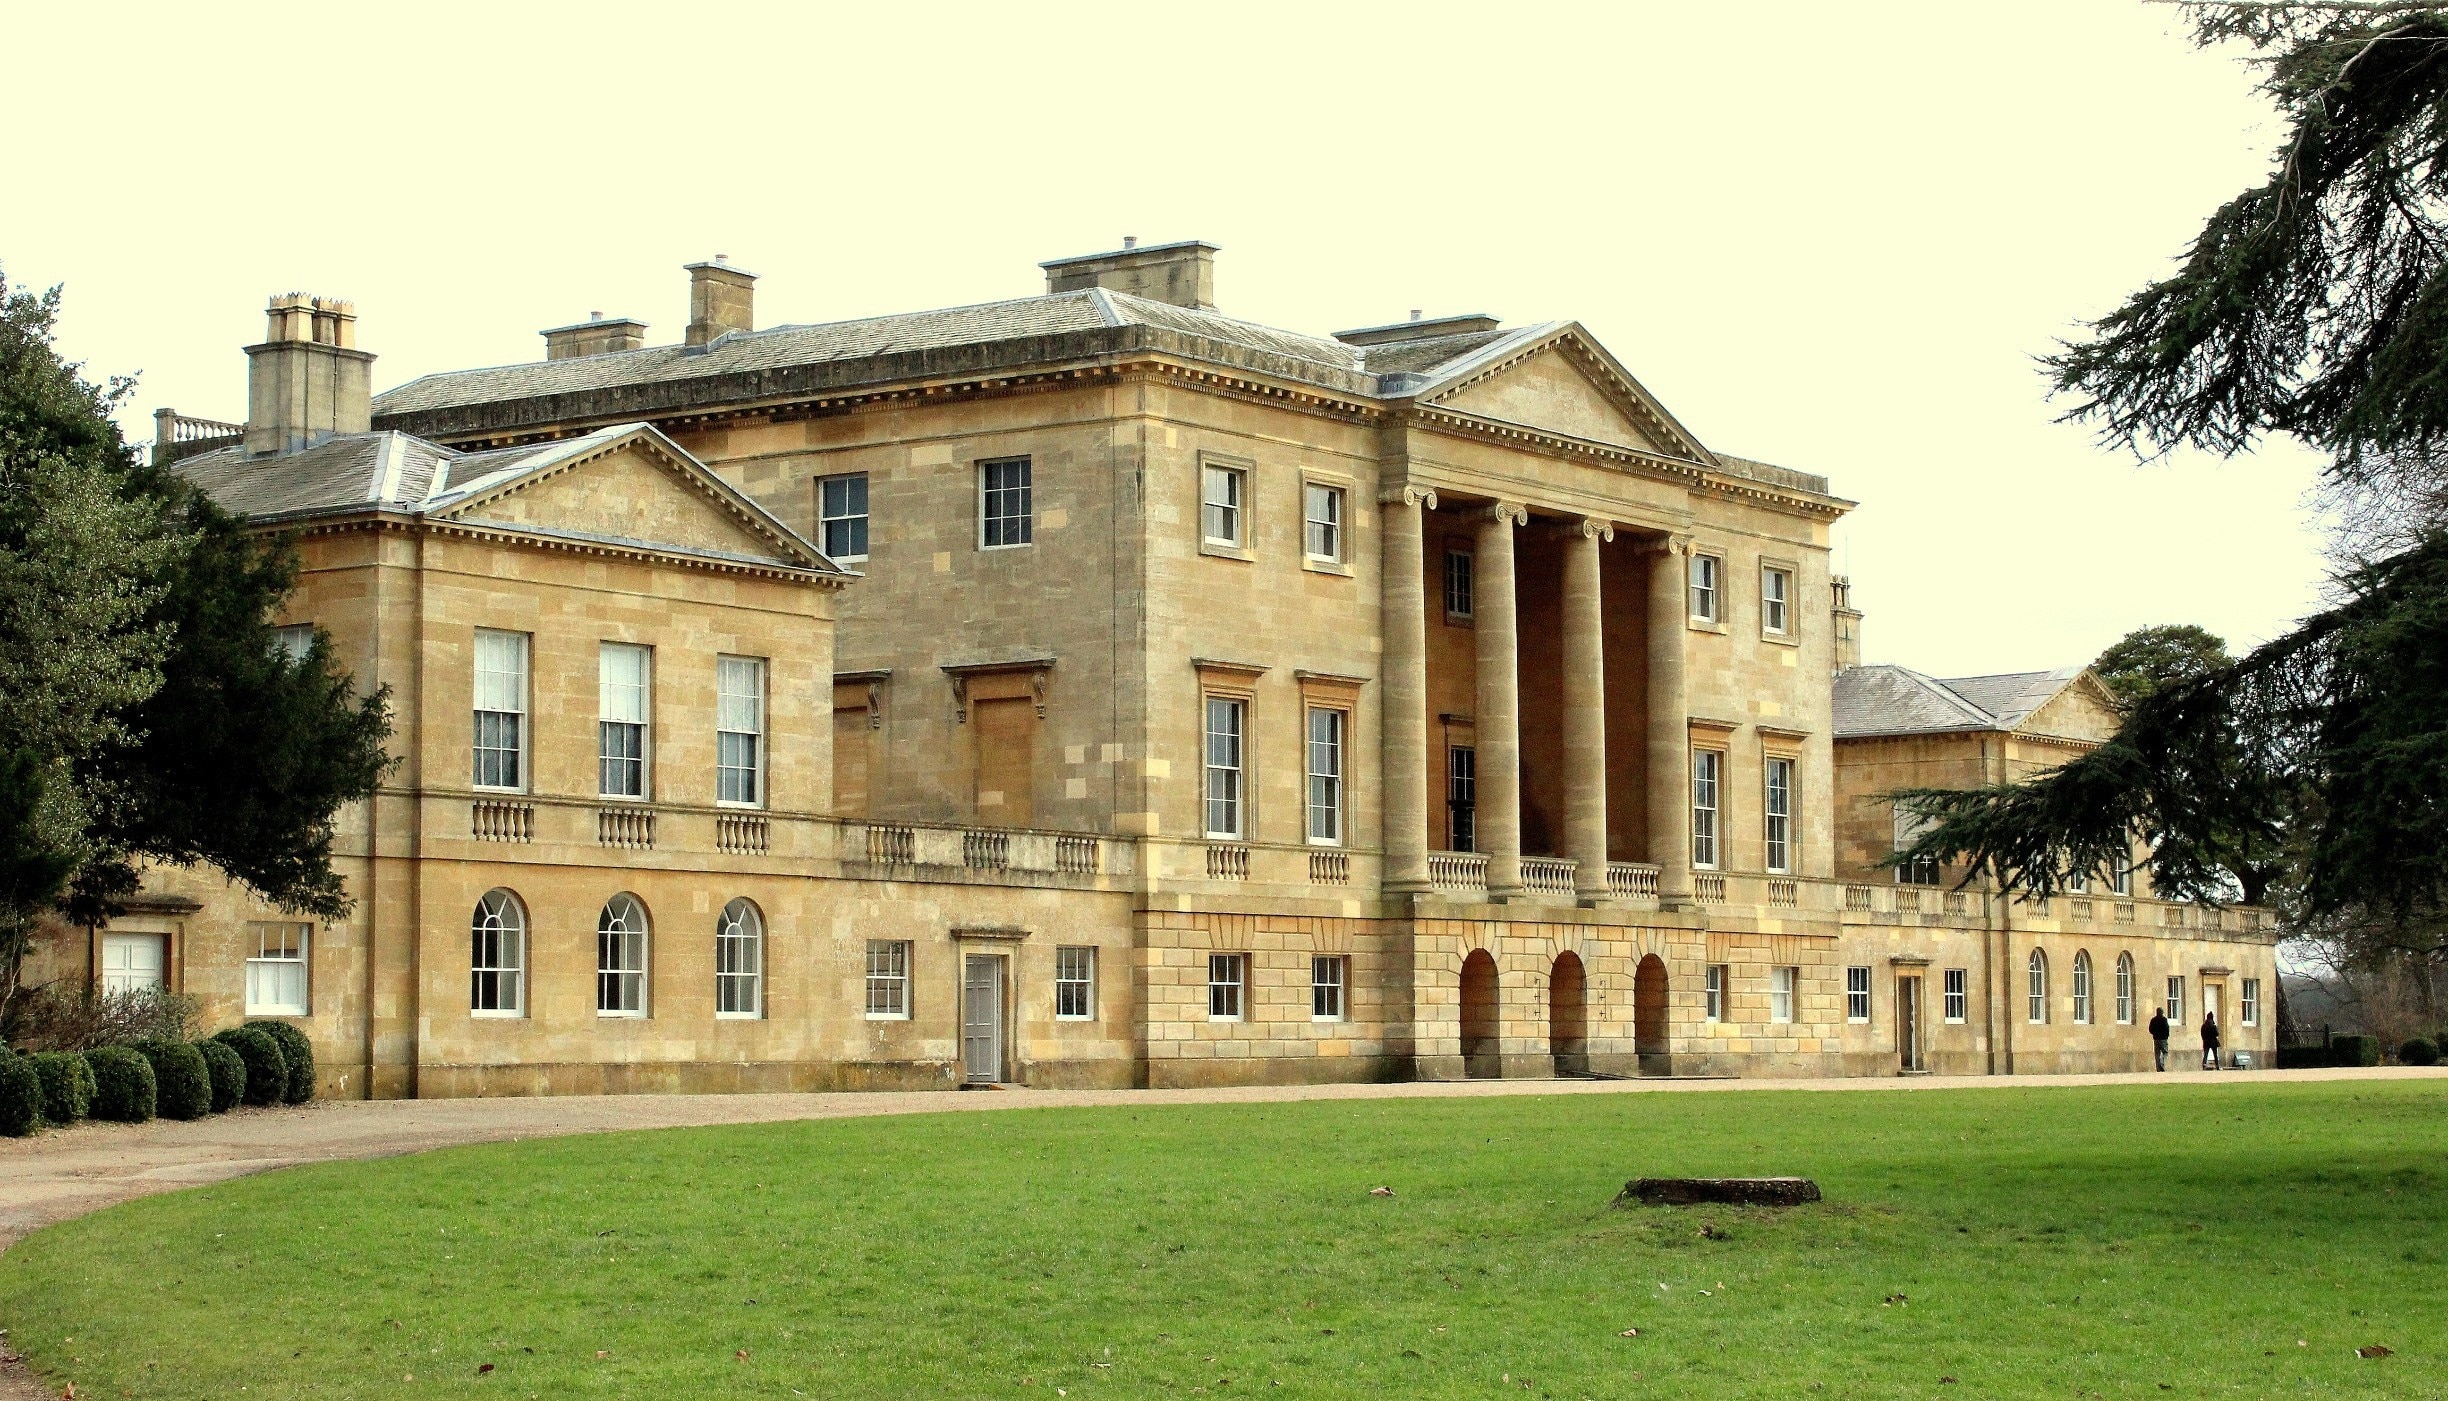 Yes this is where your favourite period Drama Downtown Abbey's London episodes are shot. This is where Pride and Prejudice is shot too. 
Stately home and a wonderful day out in Berkshire, England.
Part of National Trust

How to reach. Check the link below

http://www.nationaltrust.org.uk/basildon-park/

#architecture#